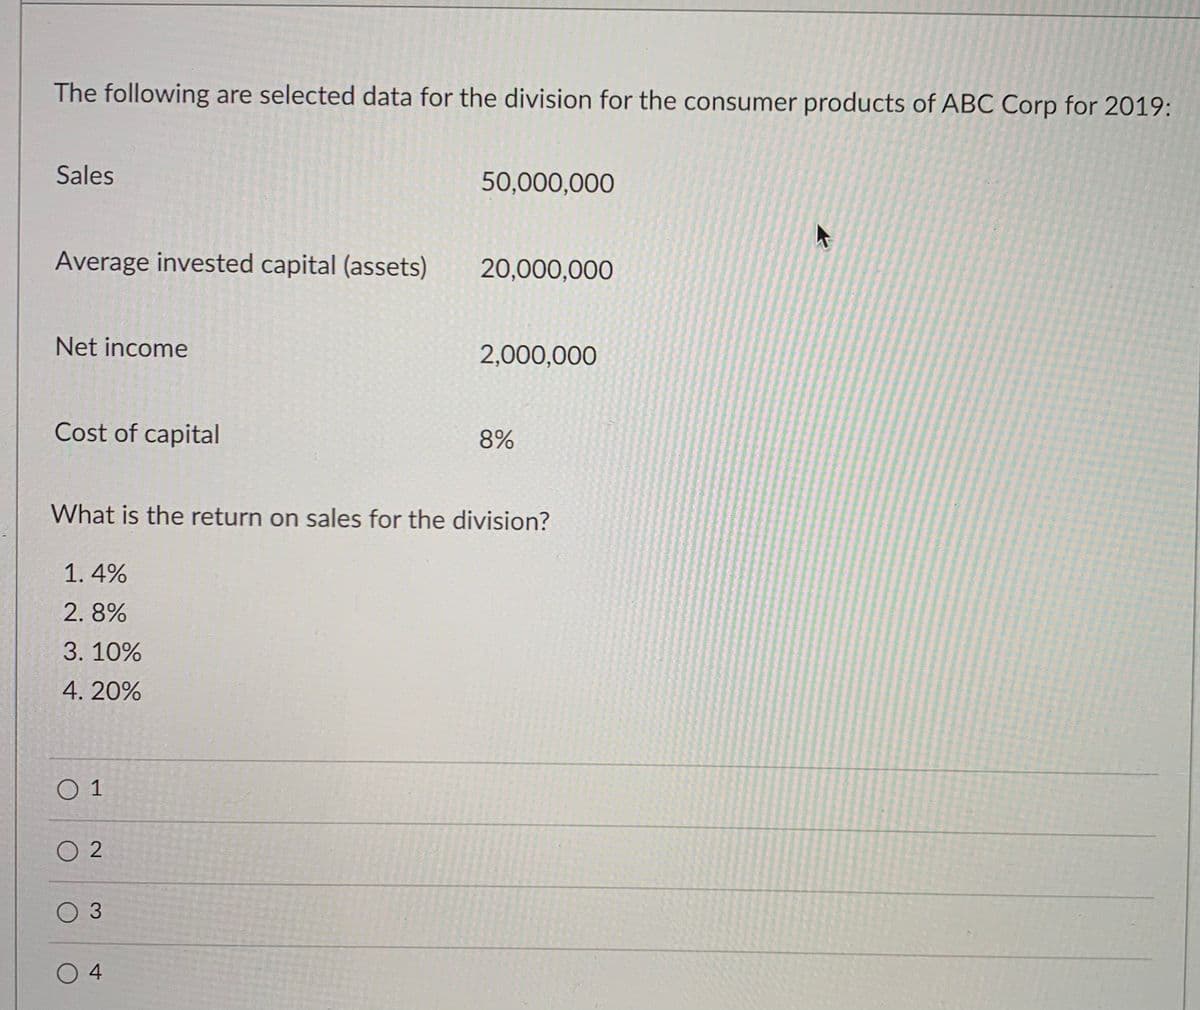 The following are selected data for the division for the consumer products of ABC Corp for 2019:
Sales
50,000,000
Average invested capital (assets)
20,000,000
Net income
2,000,000
Cost of capital
8%
What is the return on sales for the division?
1.4%
2. 8%
3.10%
4. 20%
О1
O 2
O 4
3.
